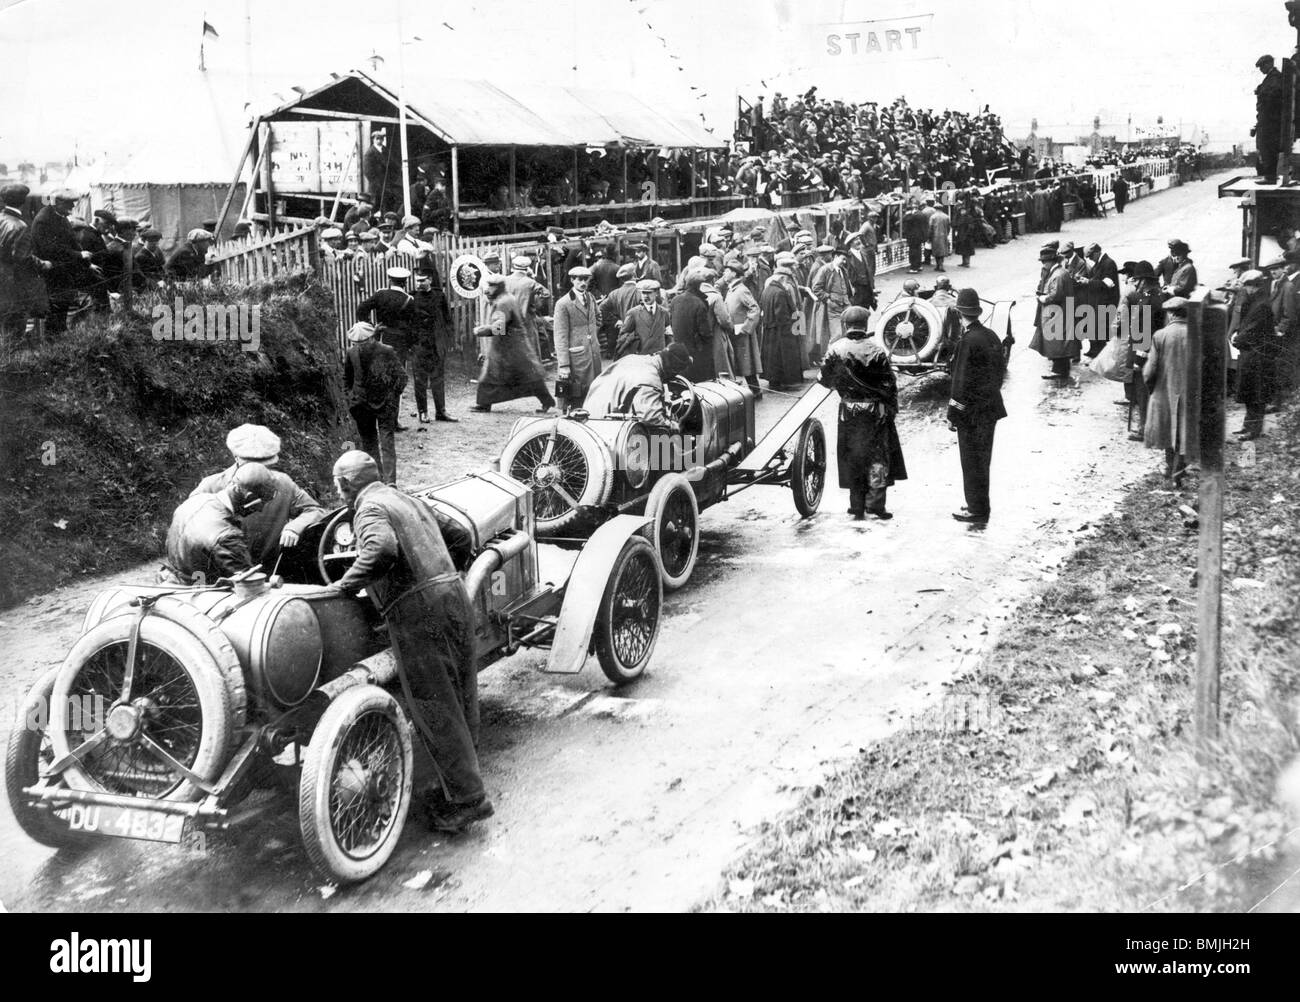 Humber  team at start of the 1914 Tourist Trophy race Stock Photo